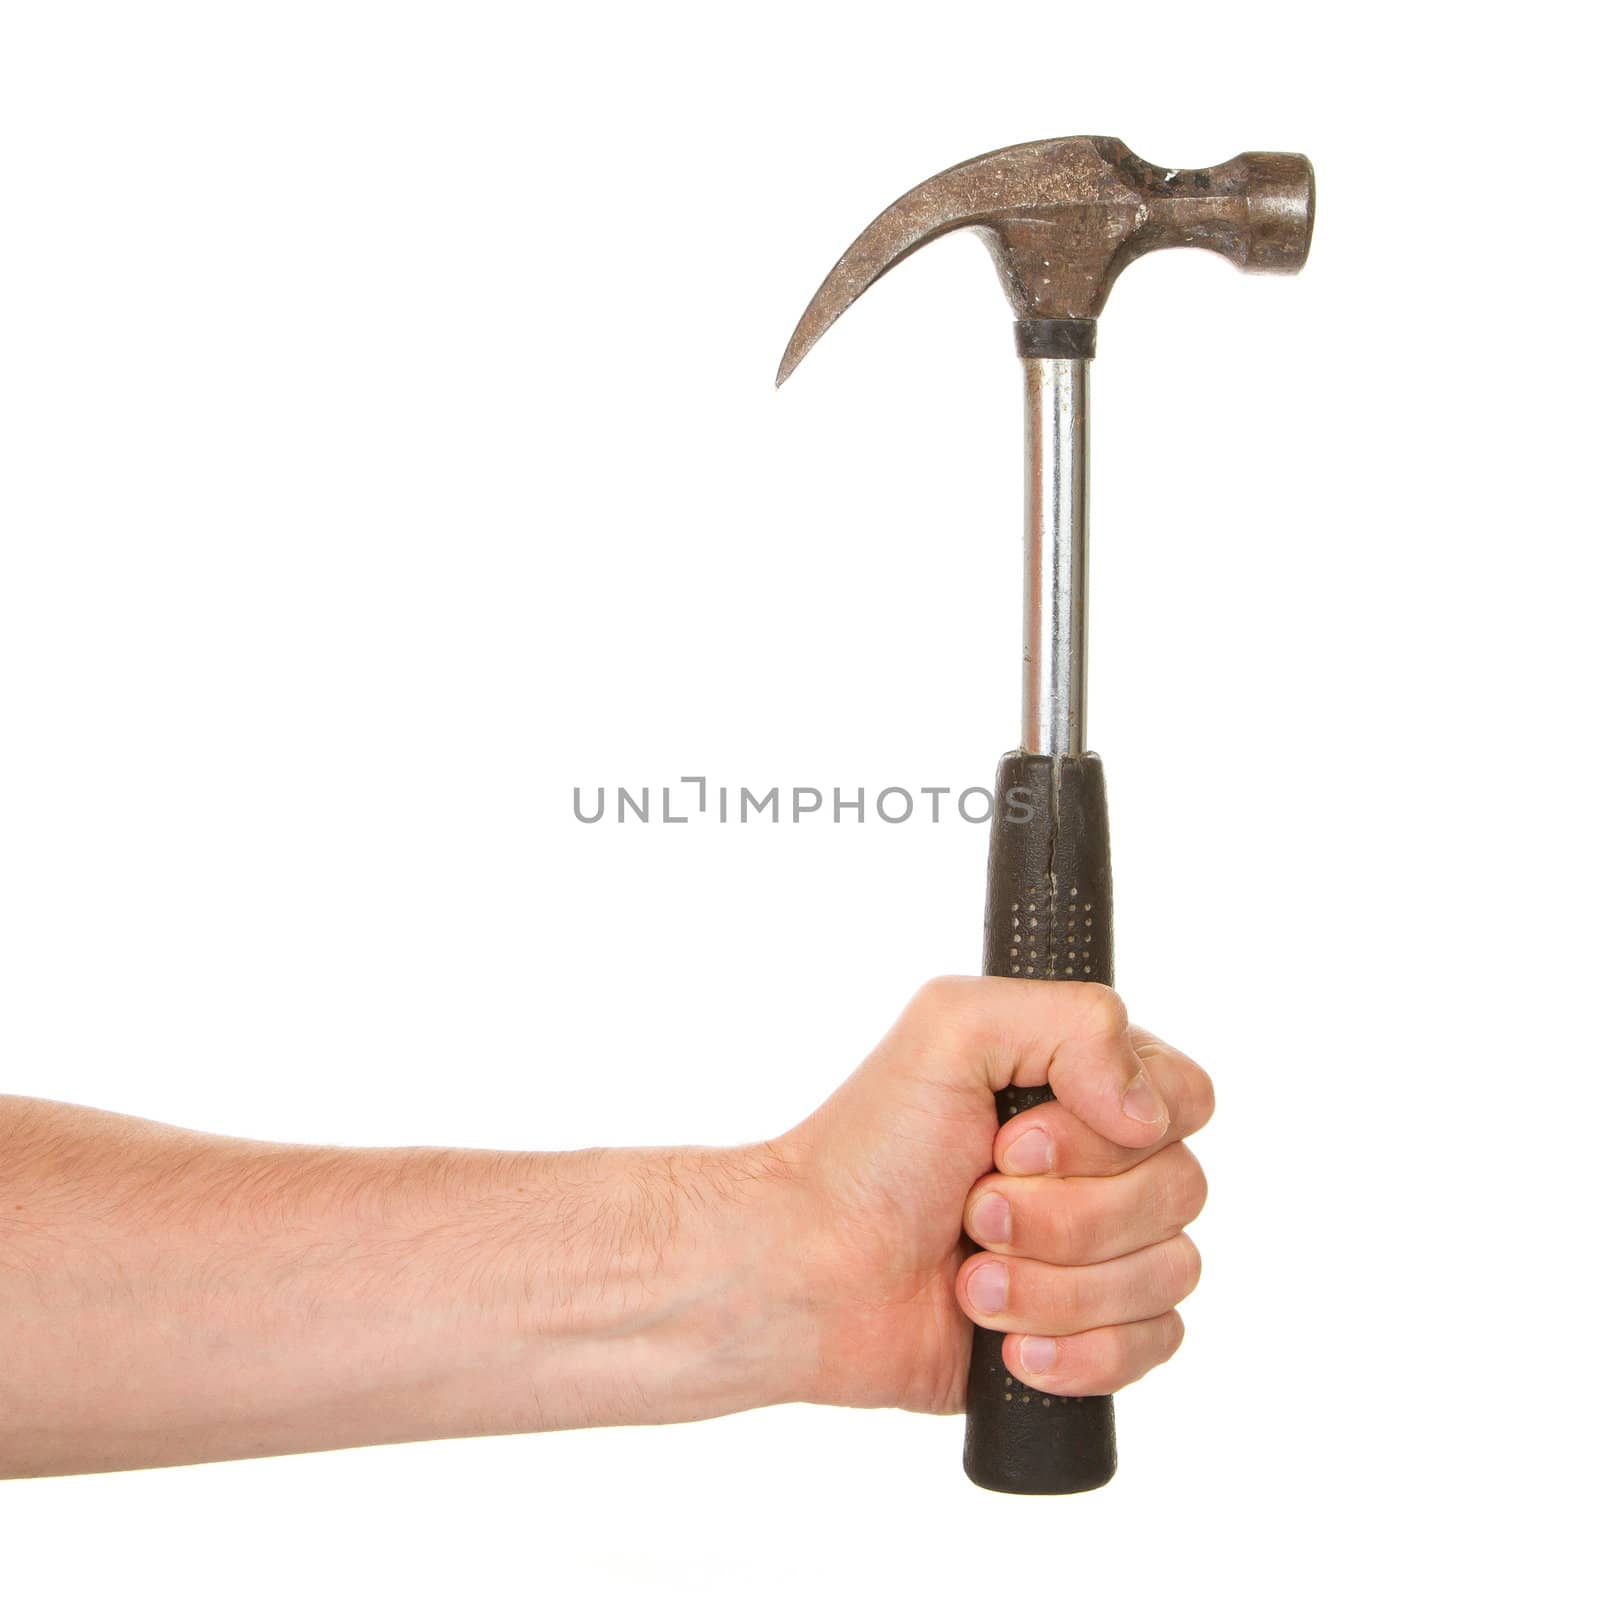 Man holding a old metal hammer, isolated on a white background